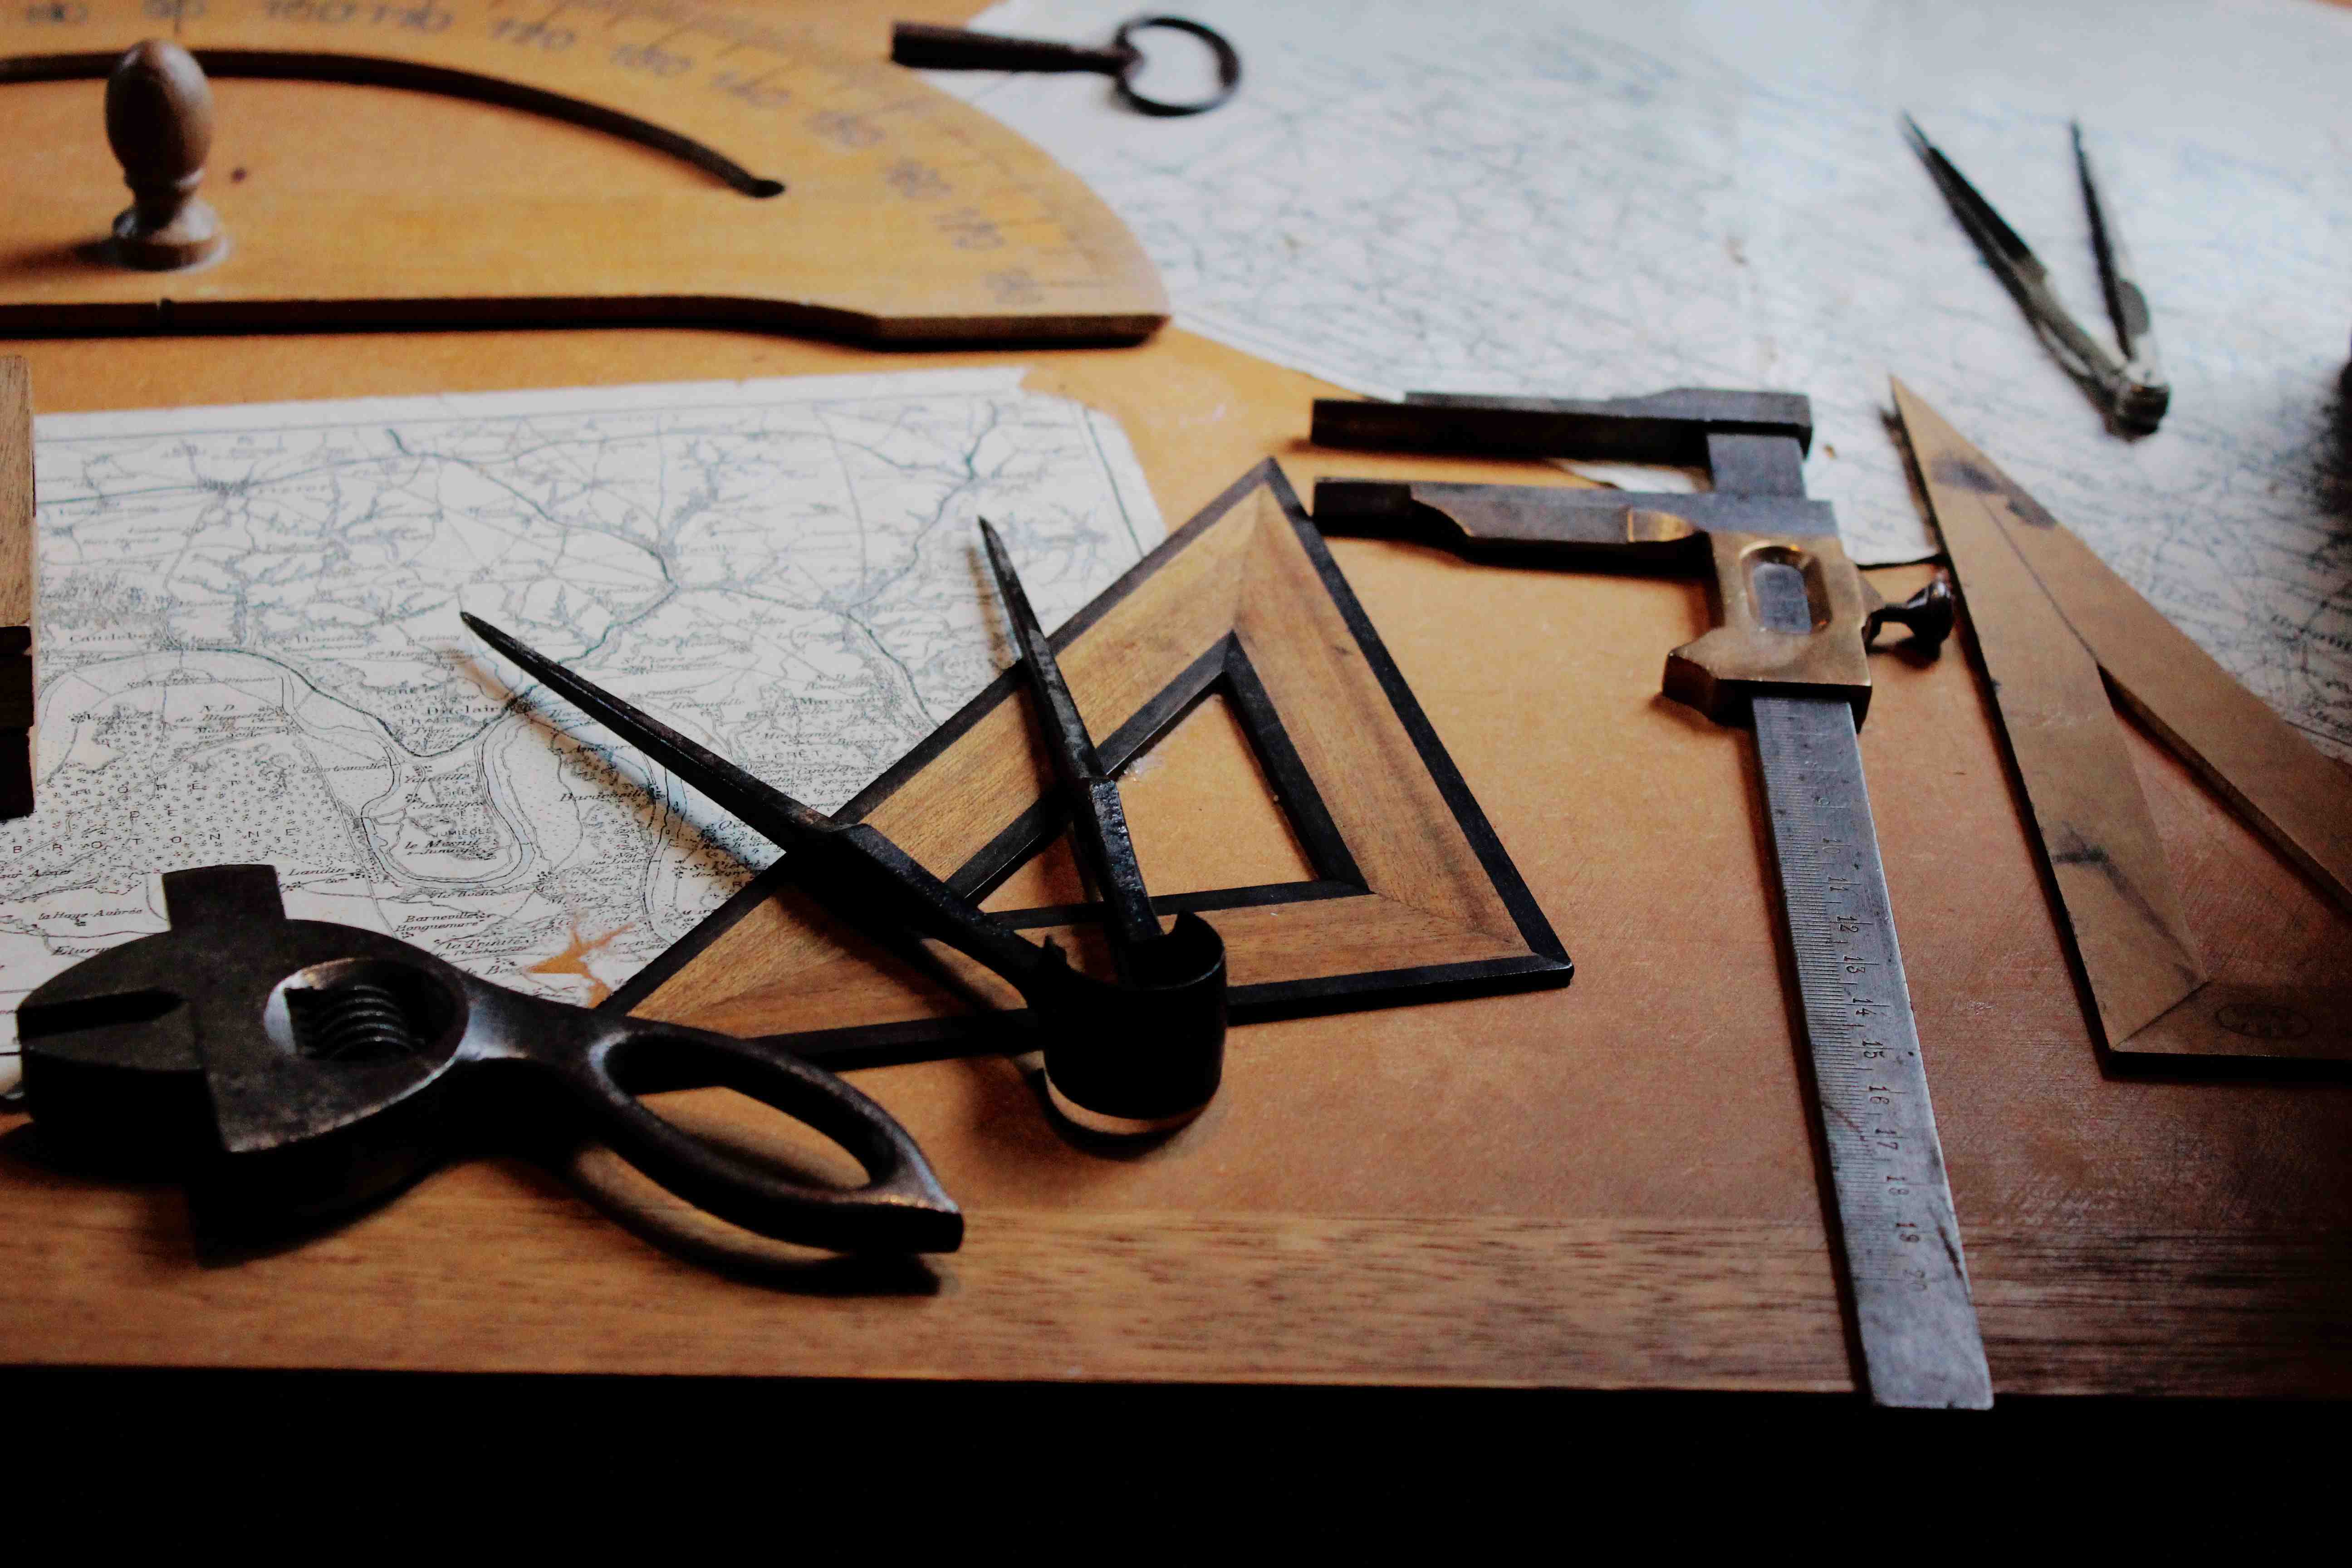 Image of map and accurate drawing implements.